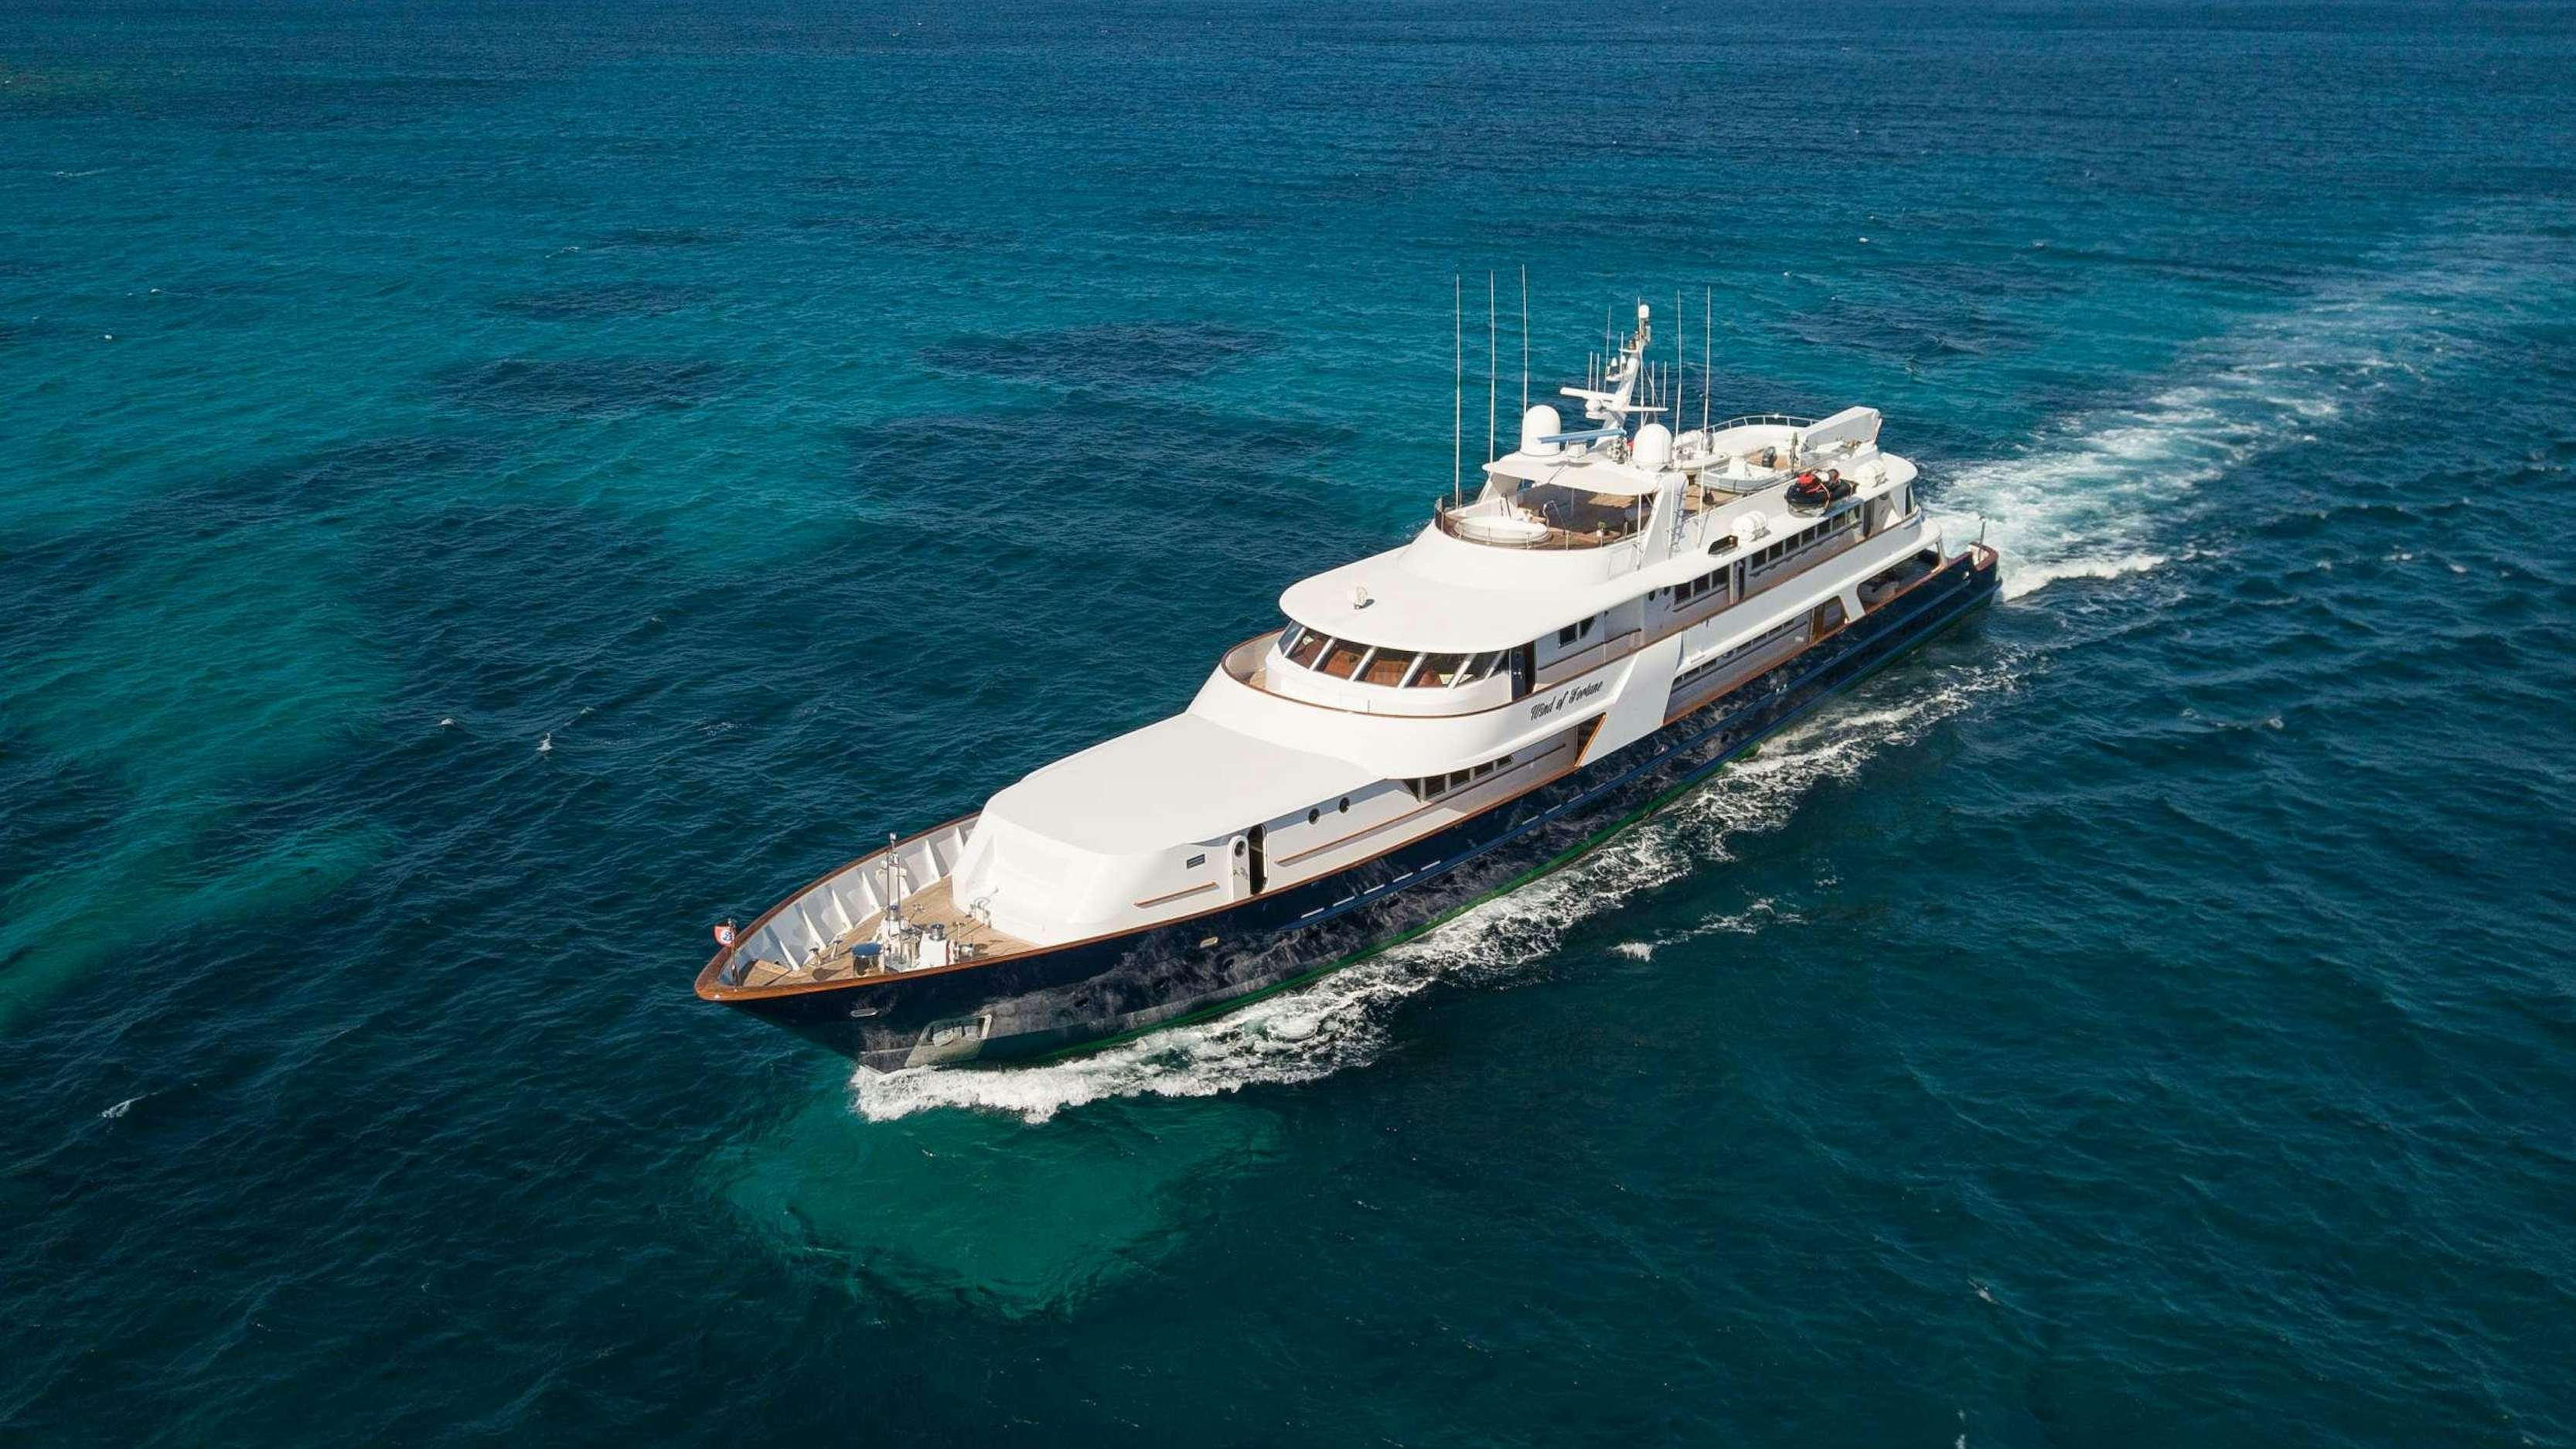 Watch Video for WIND OF FORTUNE Yacht for Charter